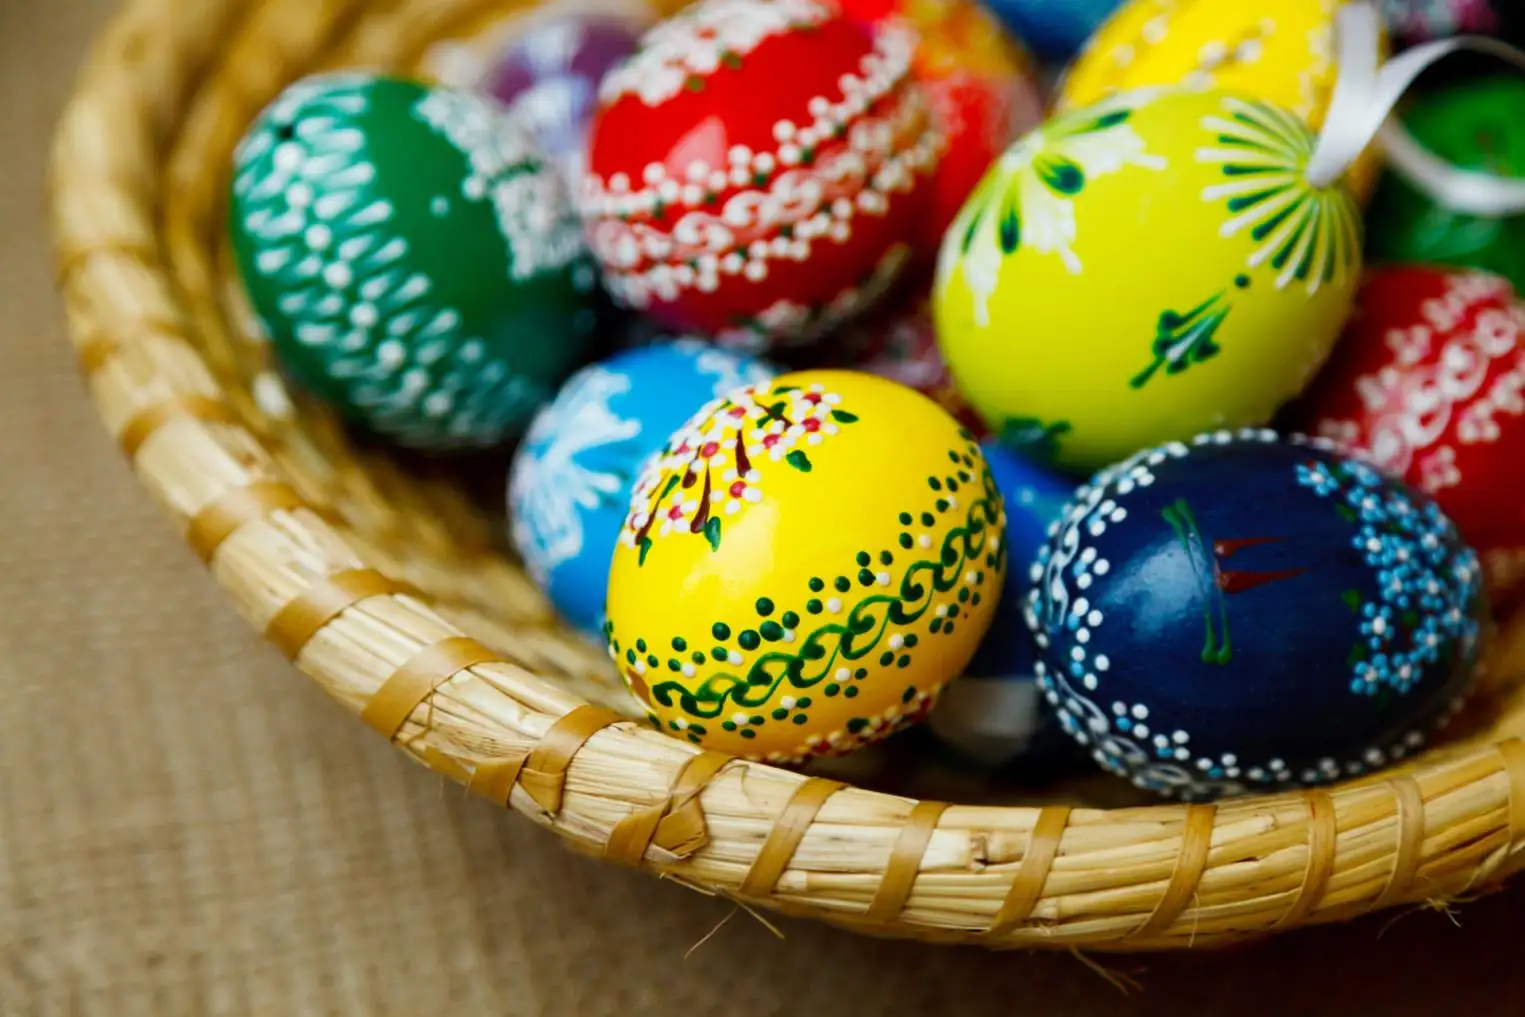 Christian decorations associated with Easter